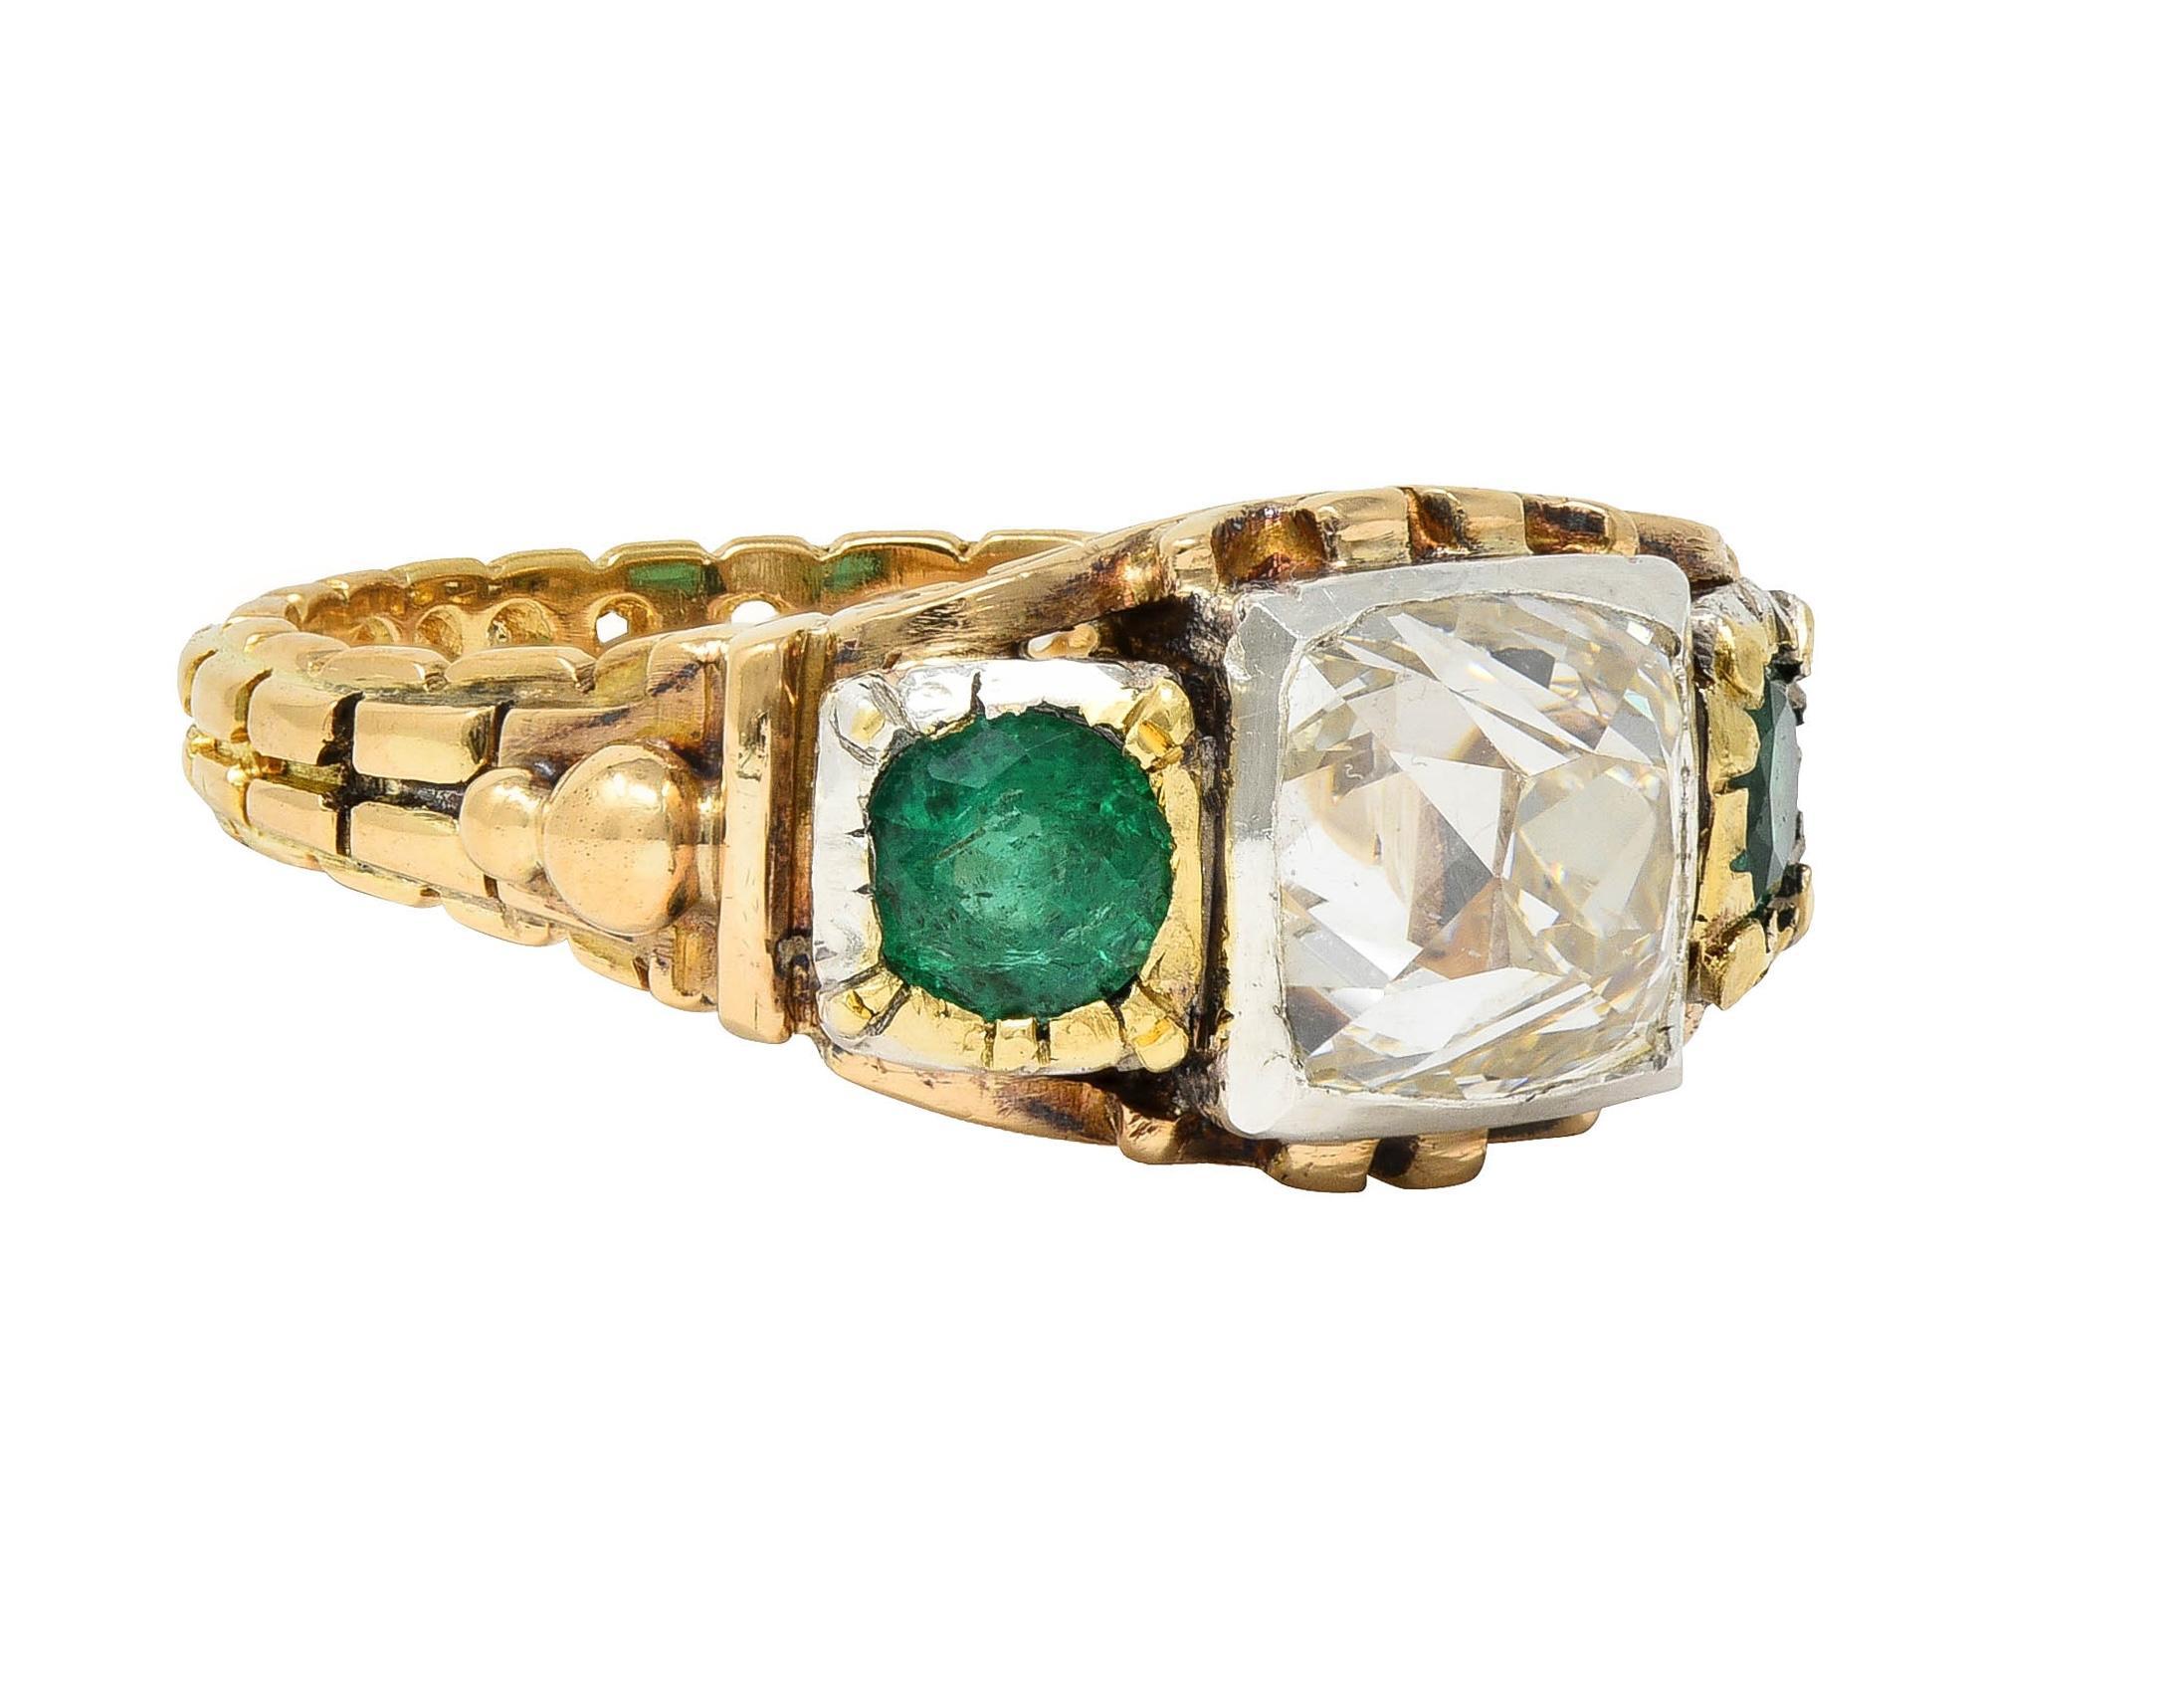 Centering a Peruzzi cut diamond weighing approximately 3.20 carats 
J color with VS2 clarity - set in a silver-topped square form bezel 
Flanked by round cut emeralds in silver-topped square bezels
Weighing approximately 0.72 carat total